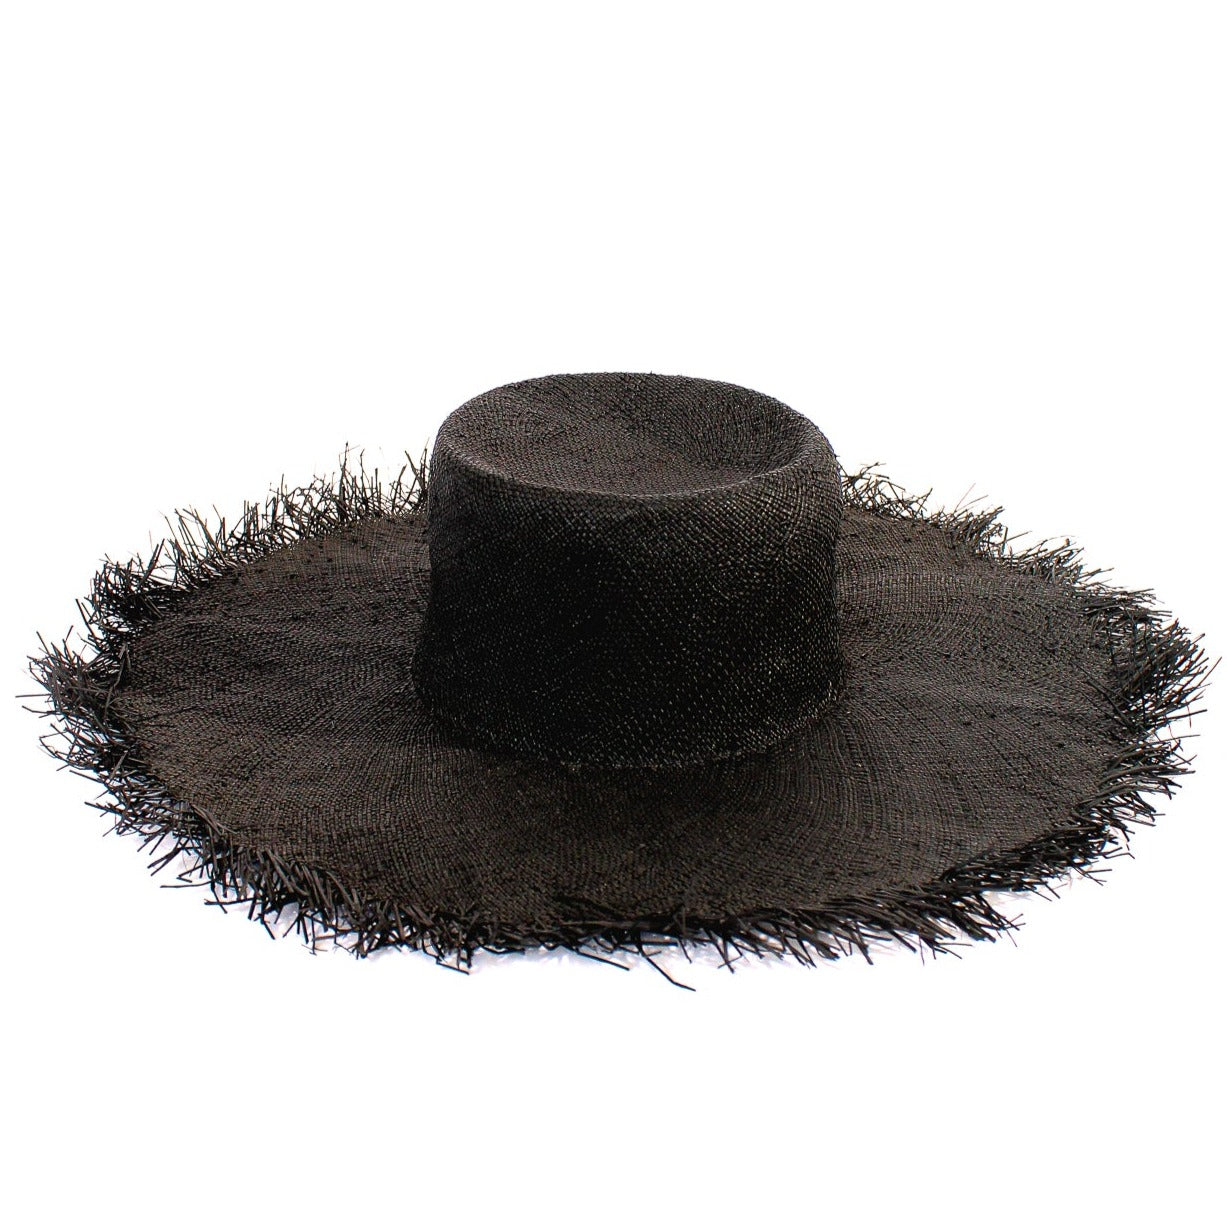 Palma frayed black straw hat for summer outings